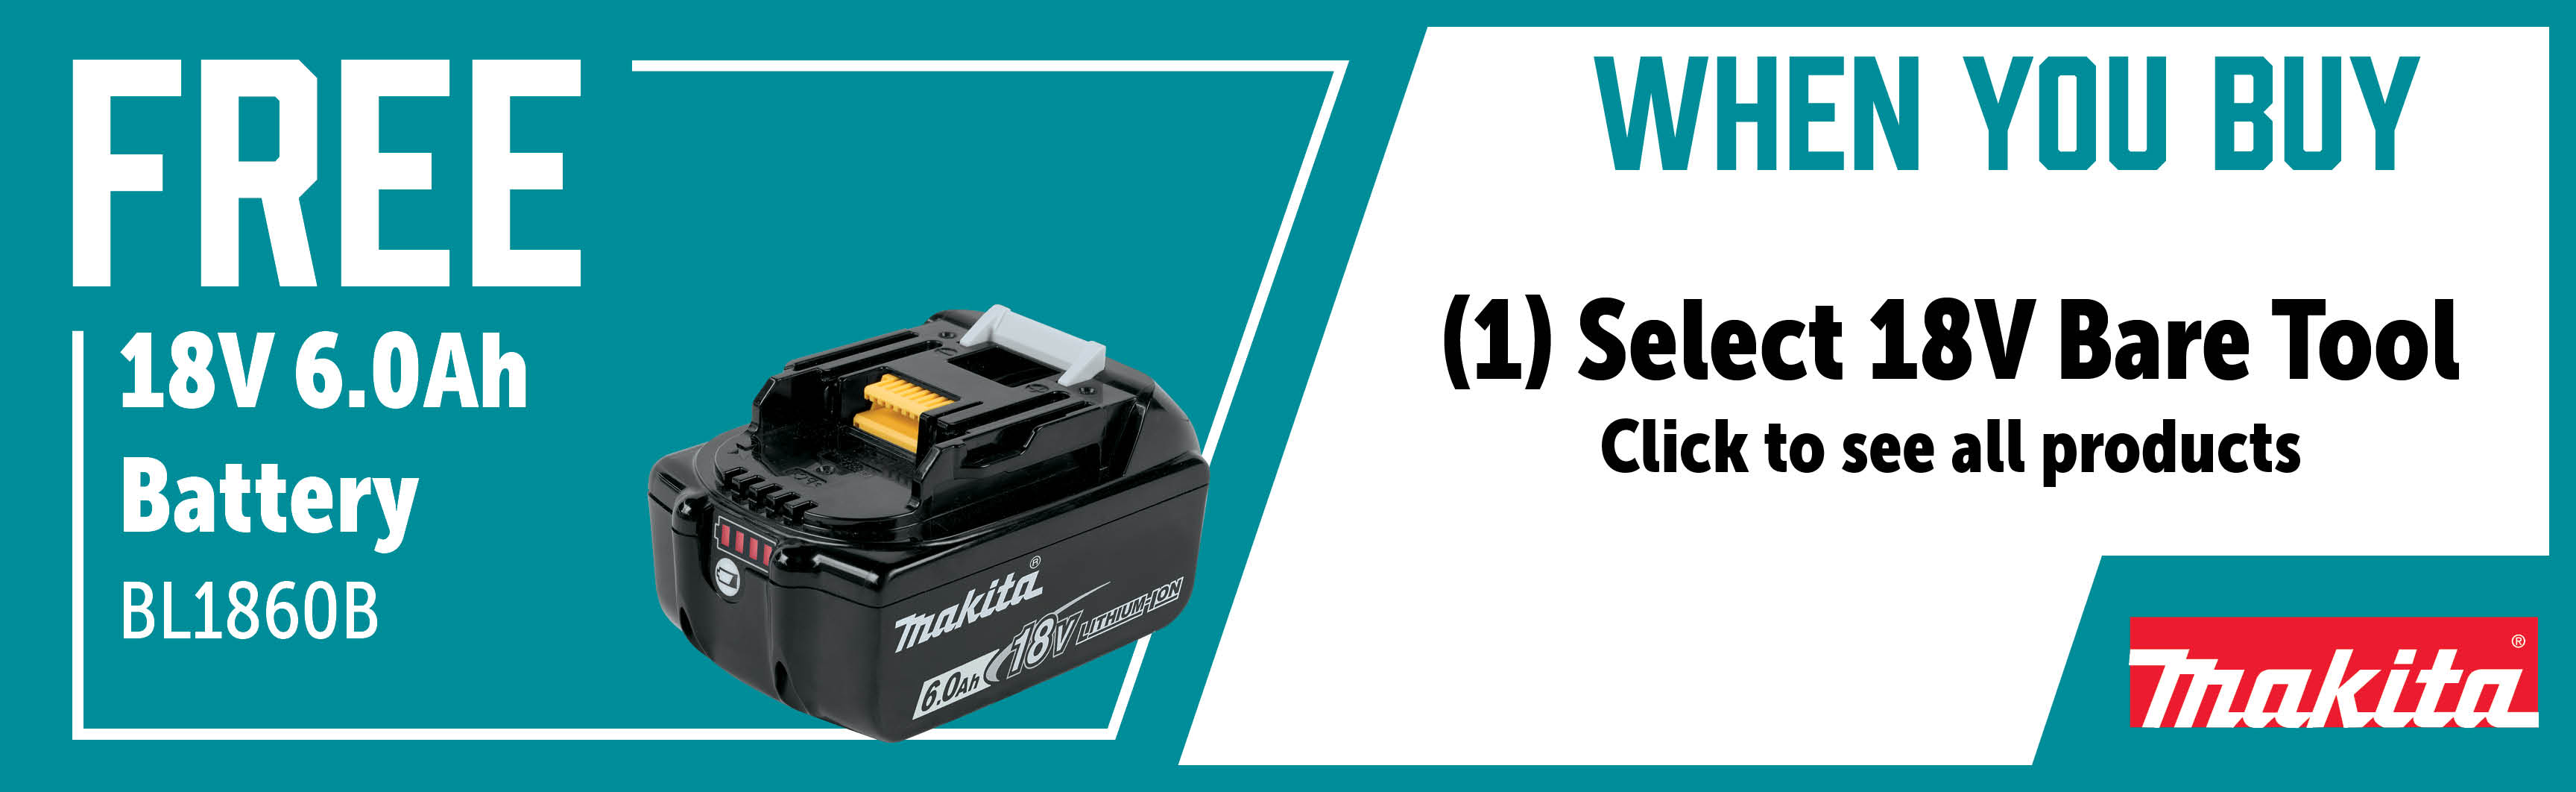 Makita May - July: Buy a qualifying LXT bare tool get a FREE BL1860B Battery